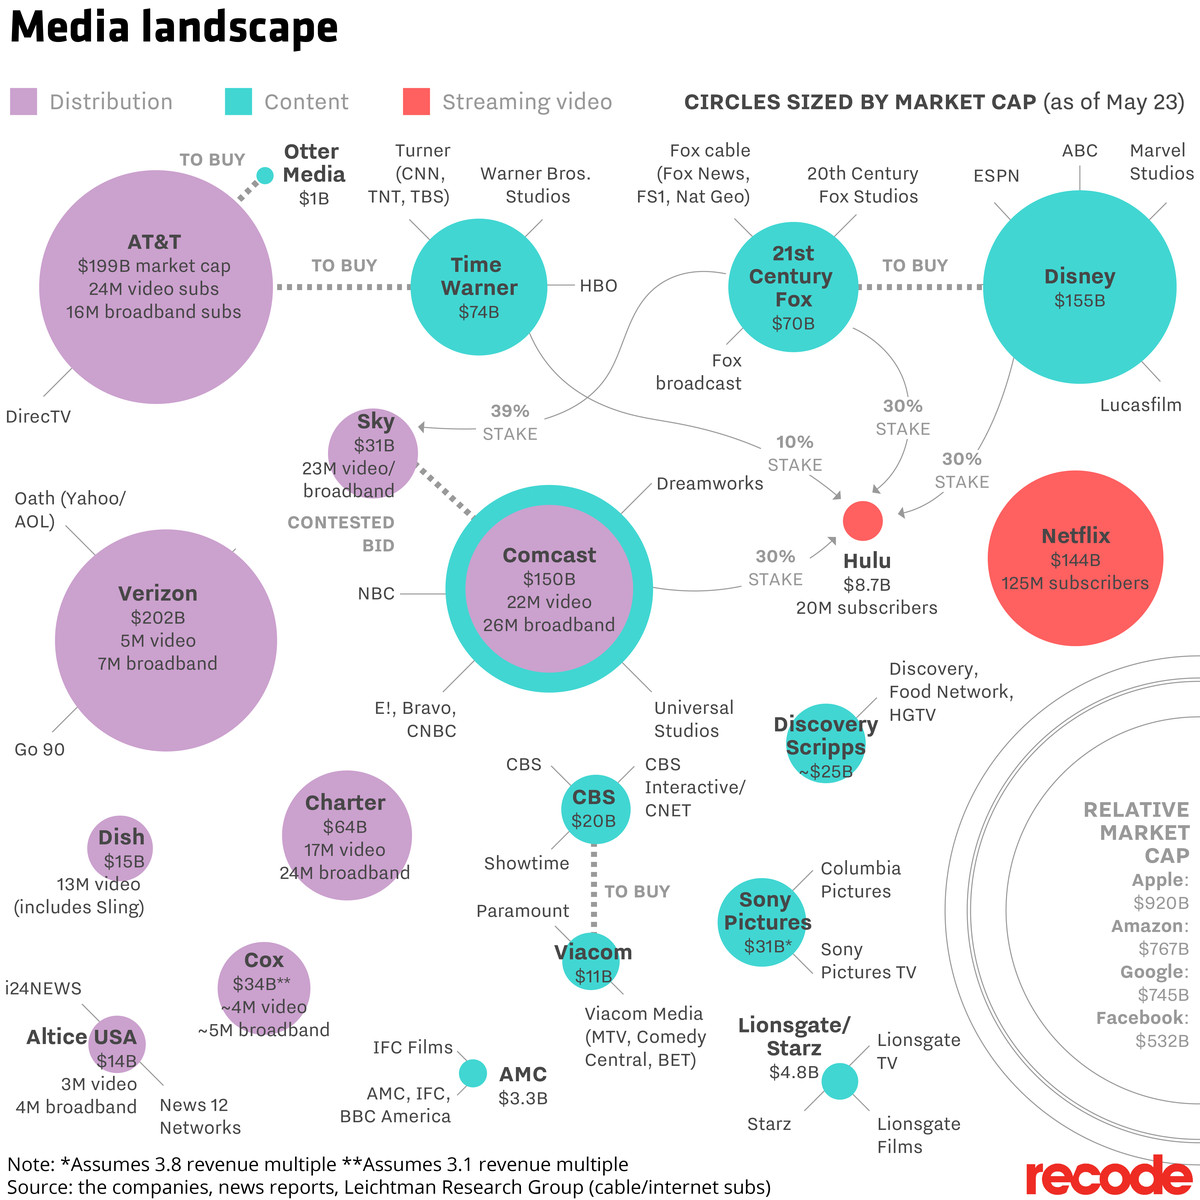 Image of the media landscape, updated May 23